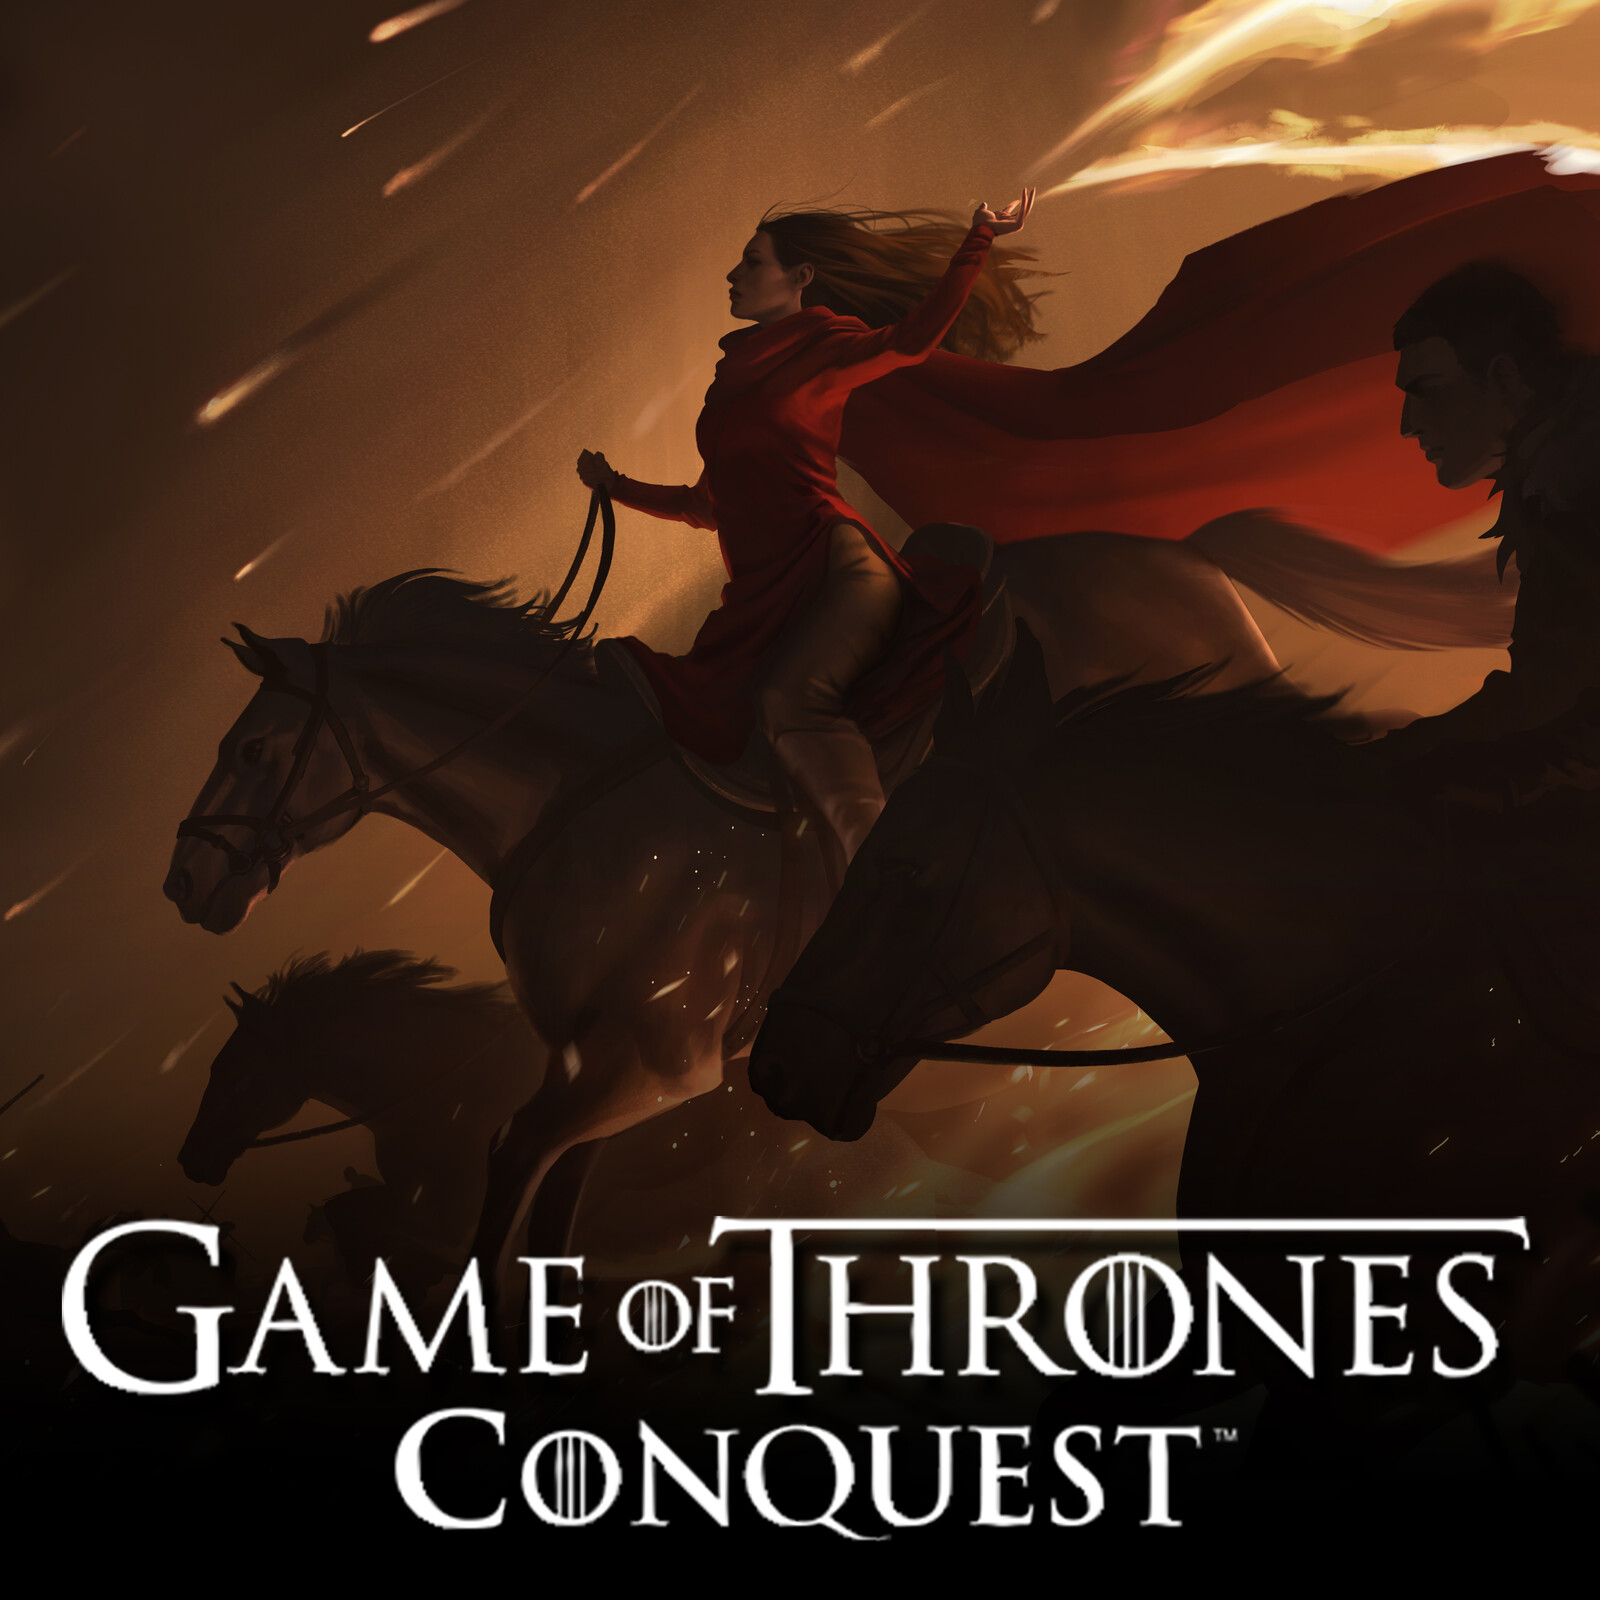 Game of Thrones: Conquest - Lord of Light (PvP) Event Art